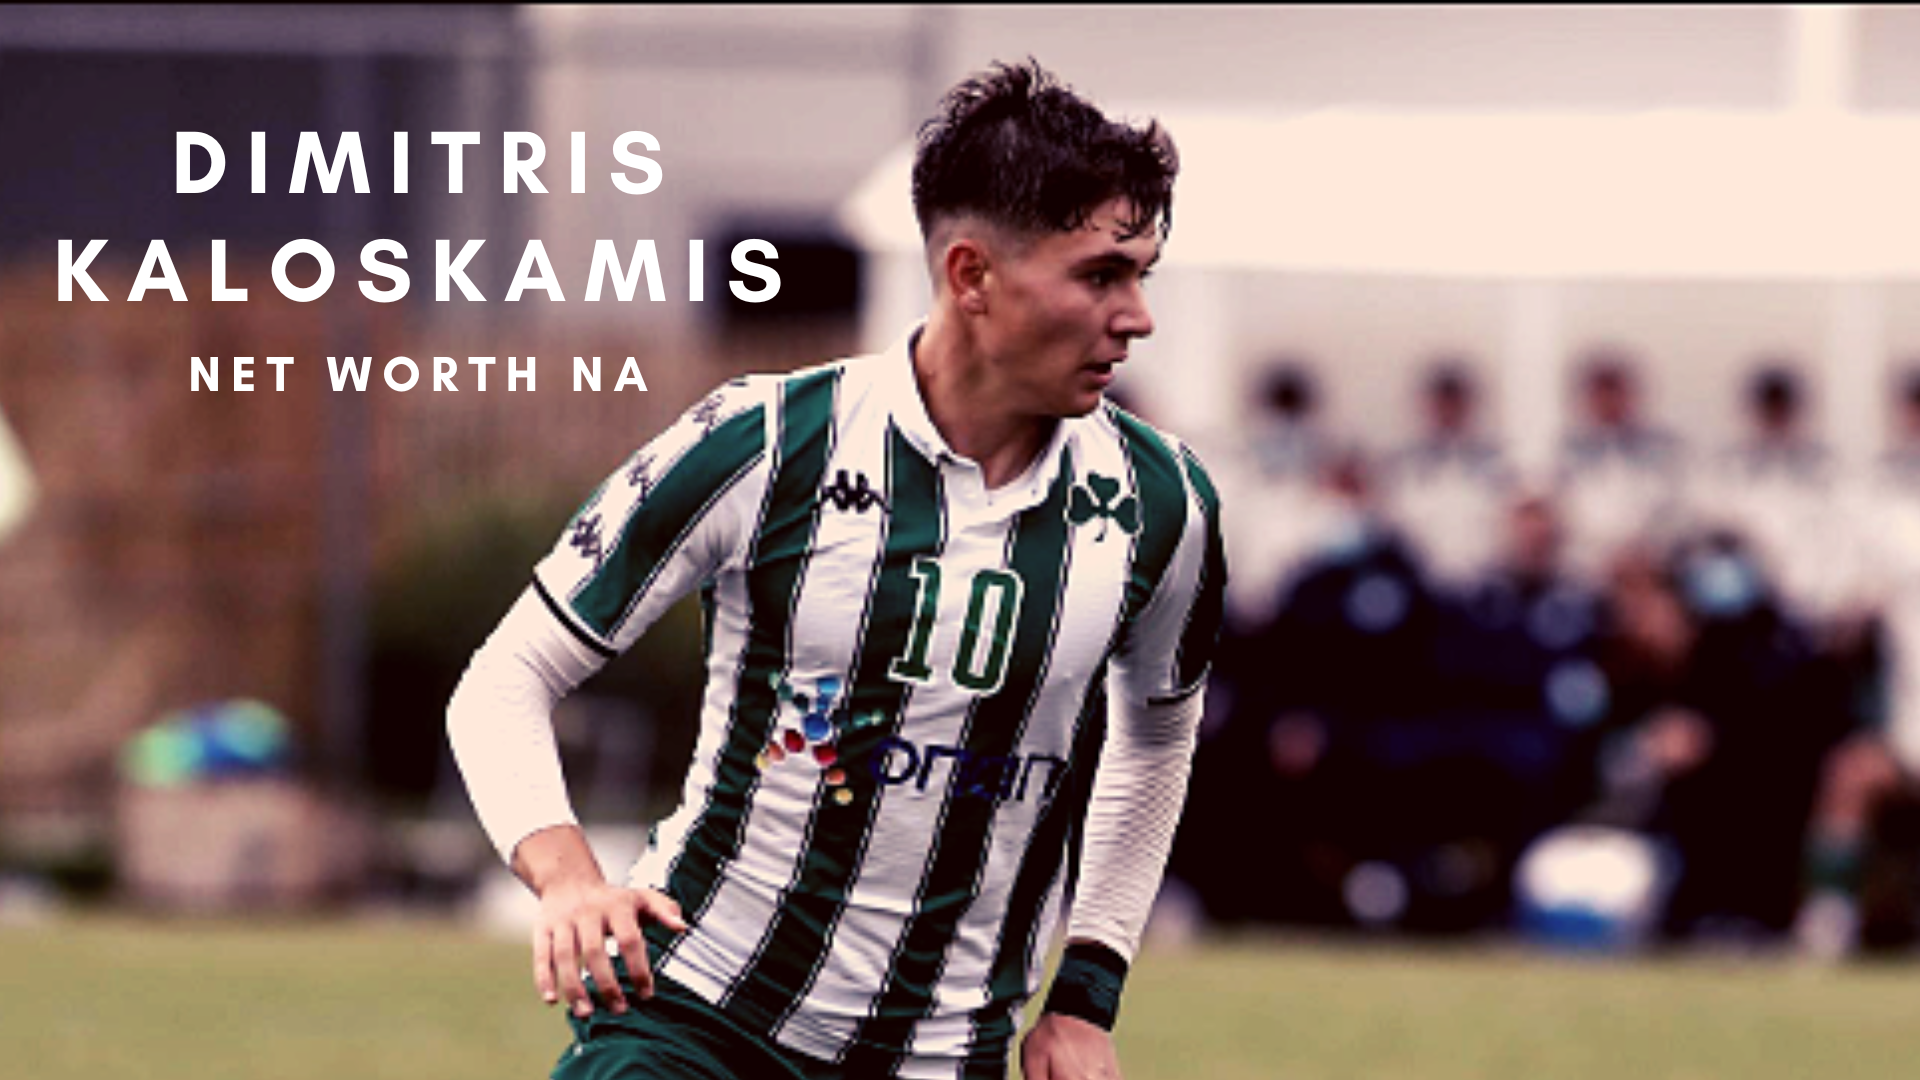 Dimitris Kaloskamis is a Greek professional football player who plays as a midfielder for the Greek professional club Panathinaikos (Credits: @kaloskamis.dimitris Instagram)